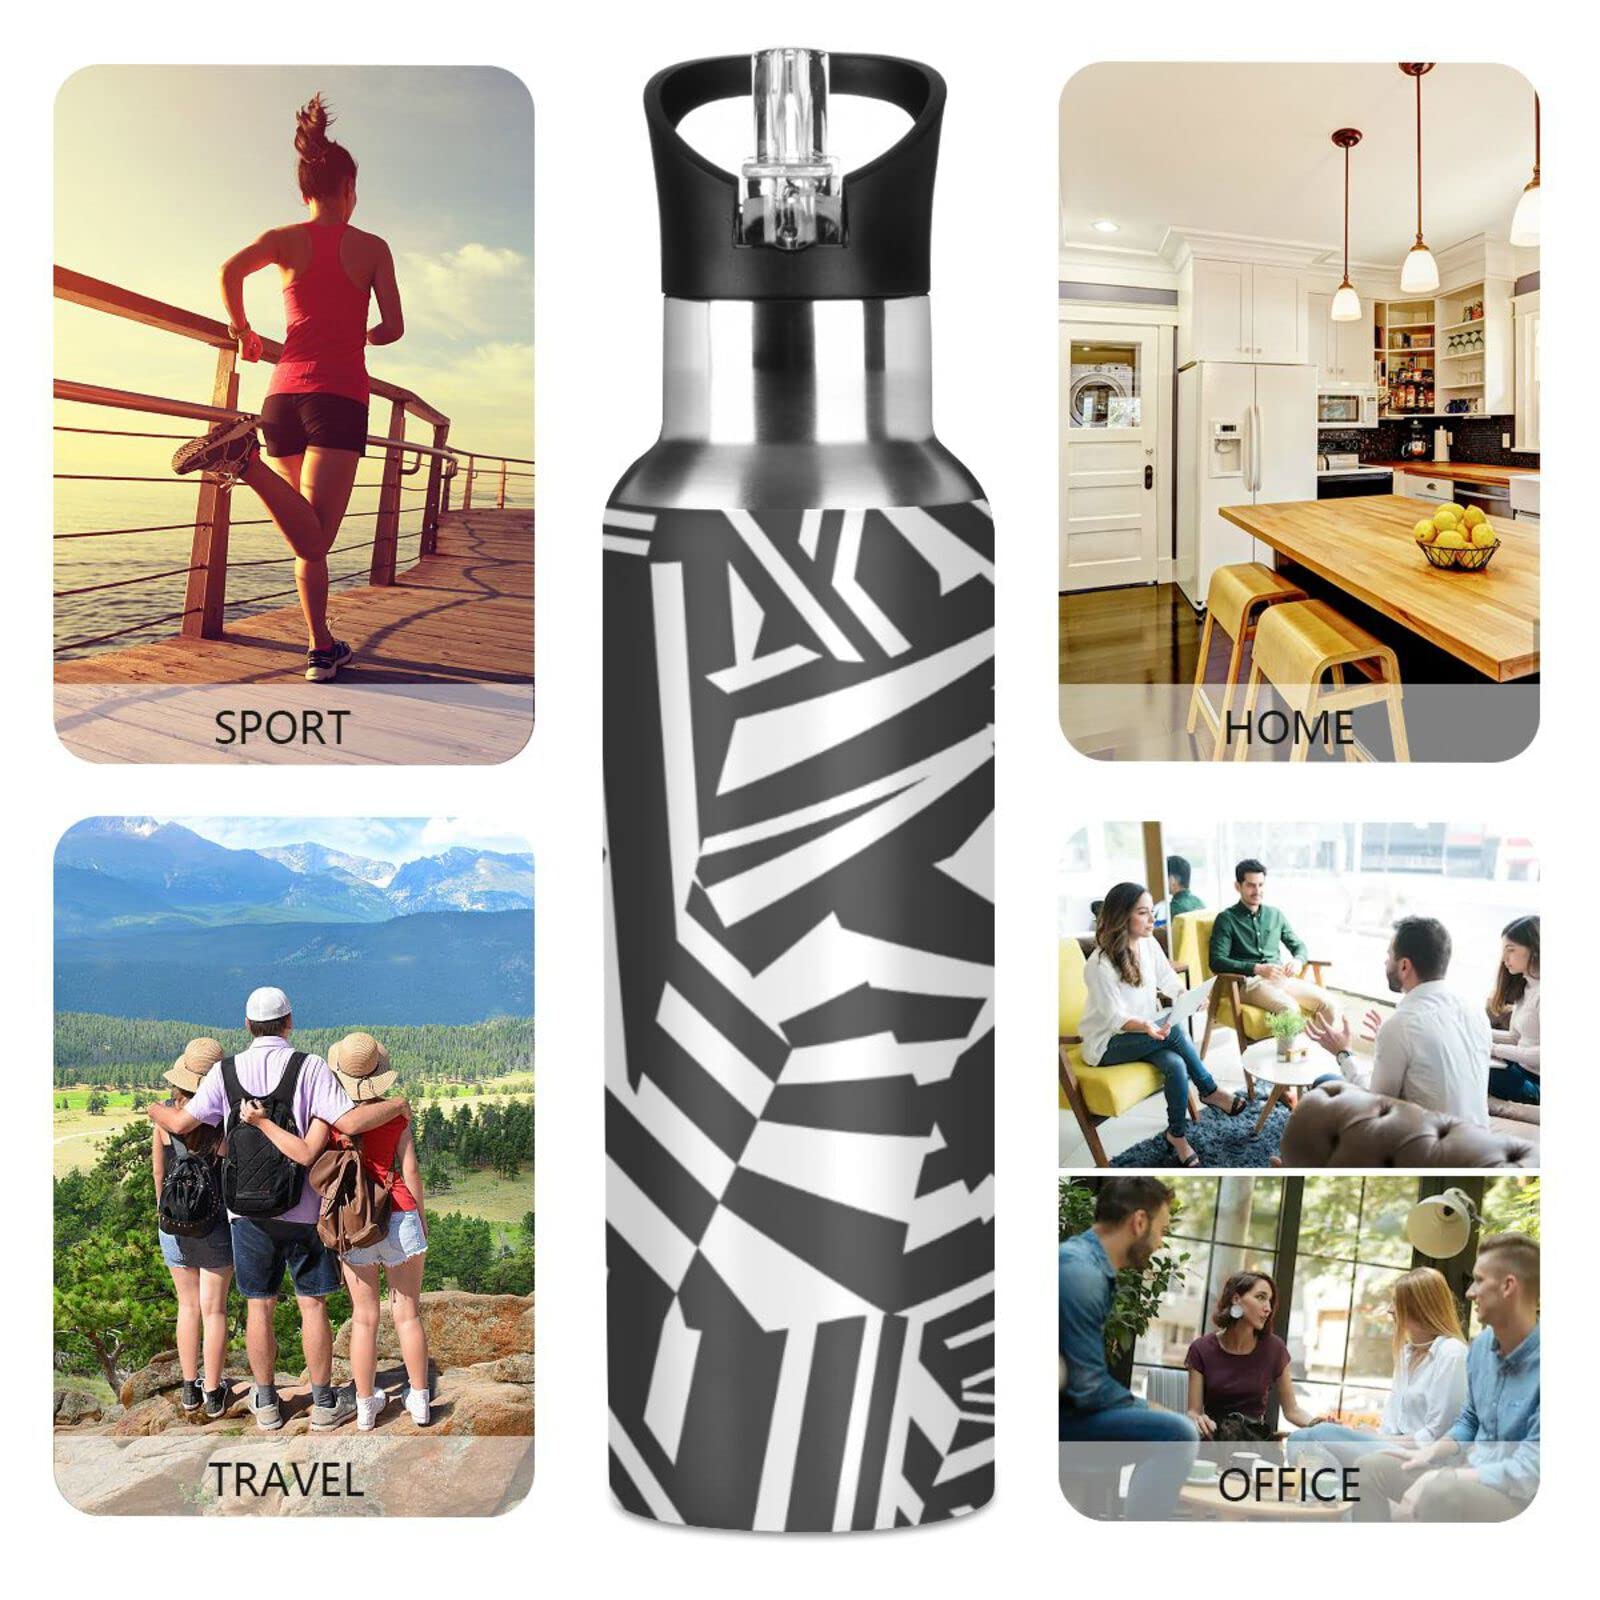 Dazzle Camouflage Water Bottle with Straw Lid Double Wall Thermos Bottle Vacuum Insulated Flask Stainless Steel Water Bottle for Gym Outdoor 35 OZ